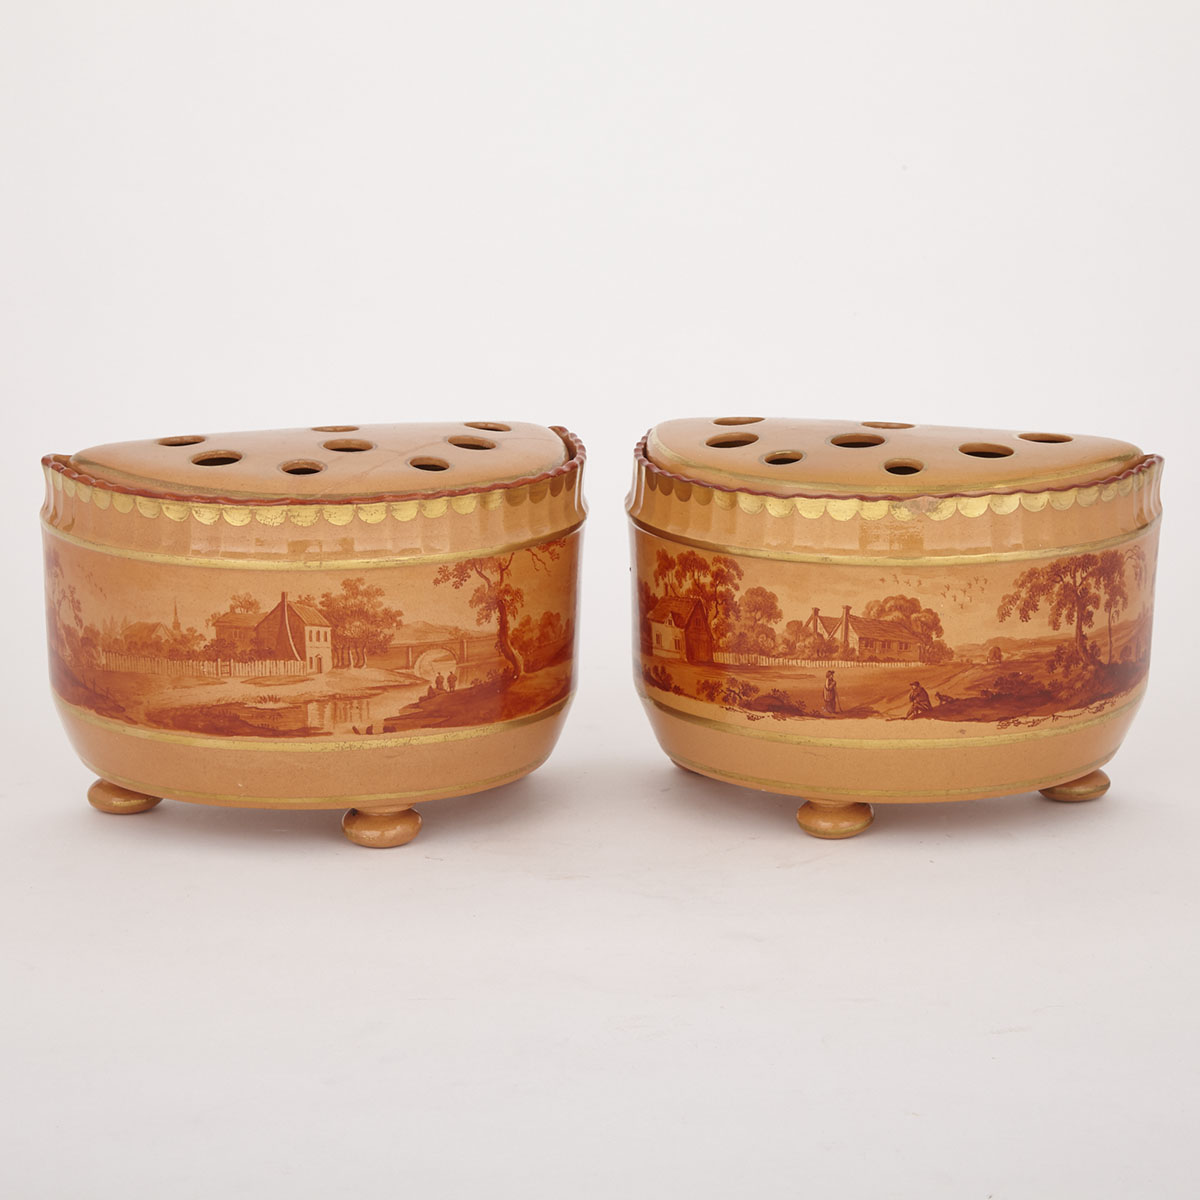 Pair of English Glazed Earthenware Bough Pots, c.1810-15